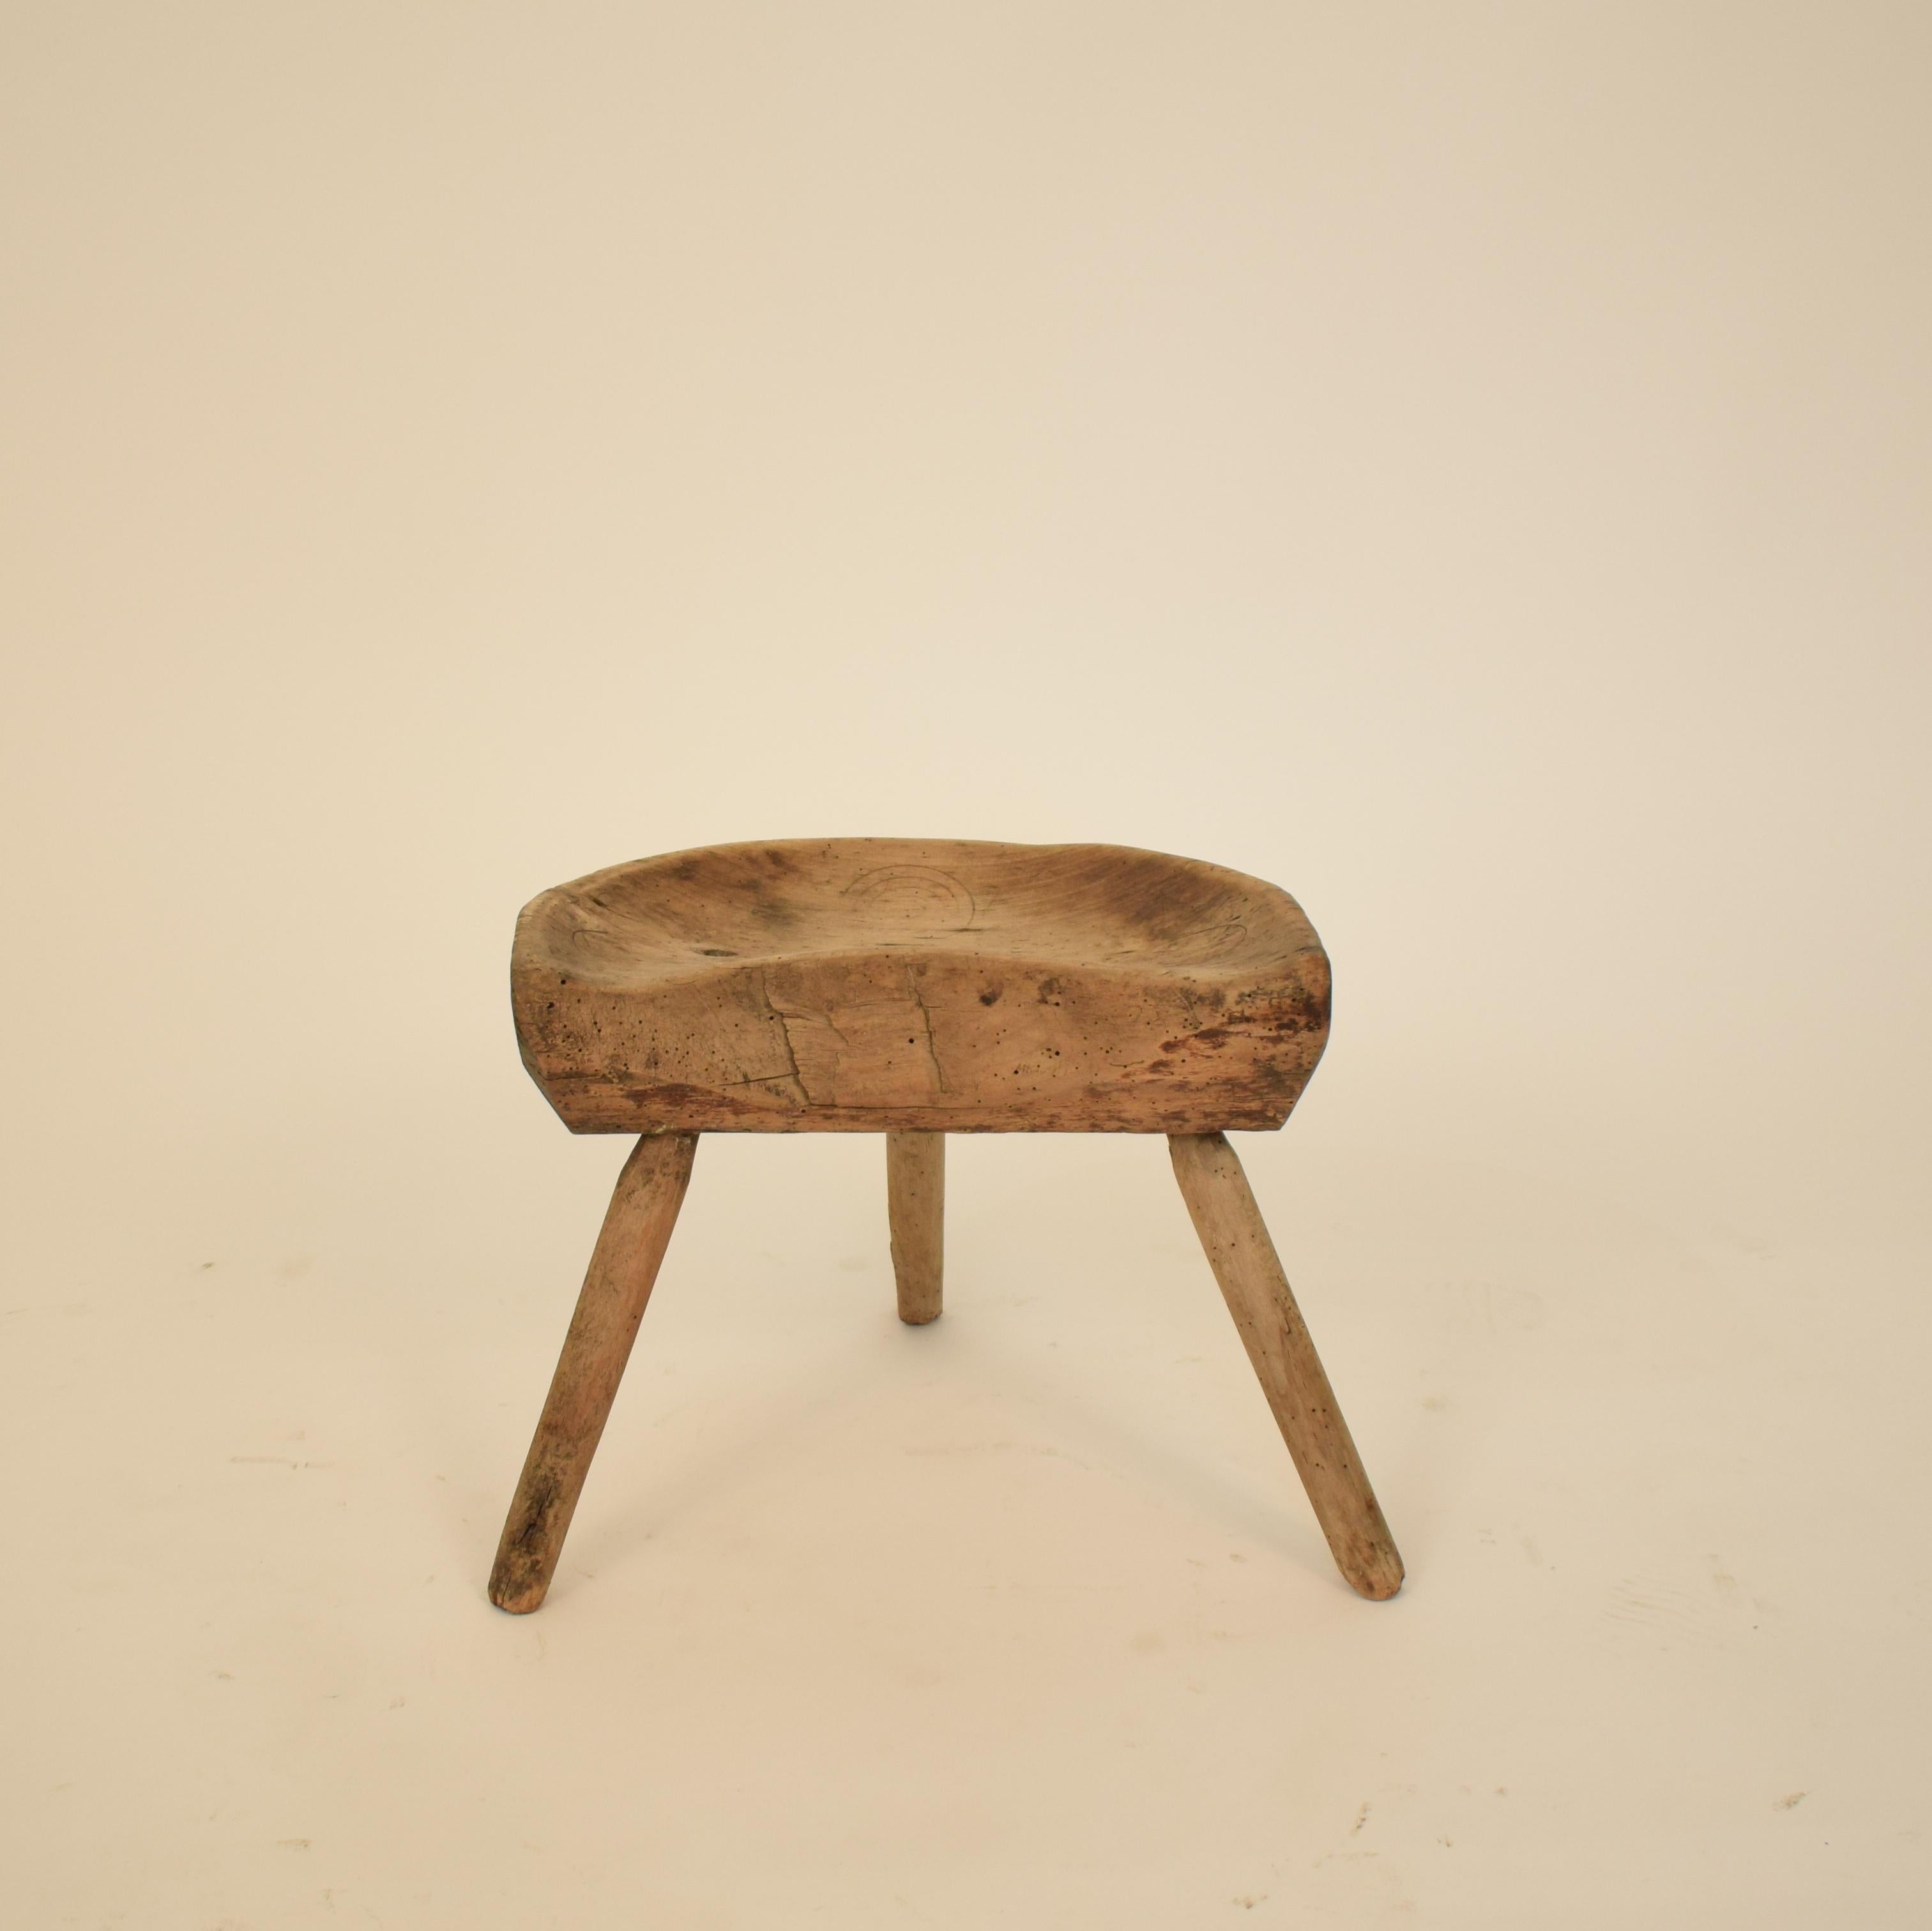 German Early 19th Century Primitive Country Splayed Leg Cobbler Stool in Cherry Wood